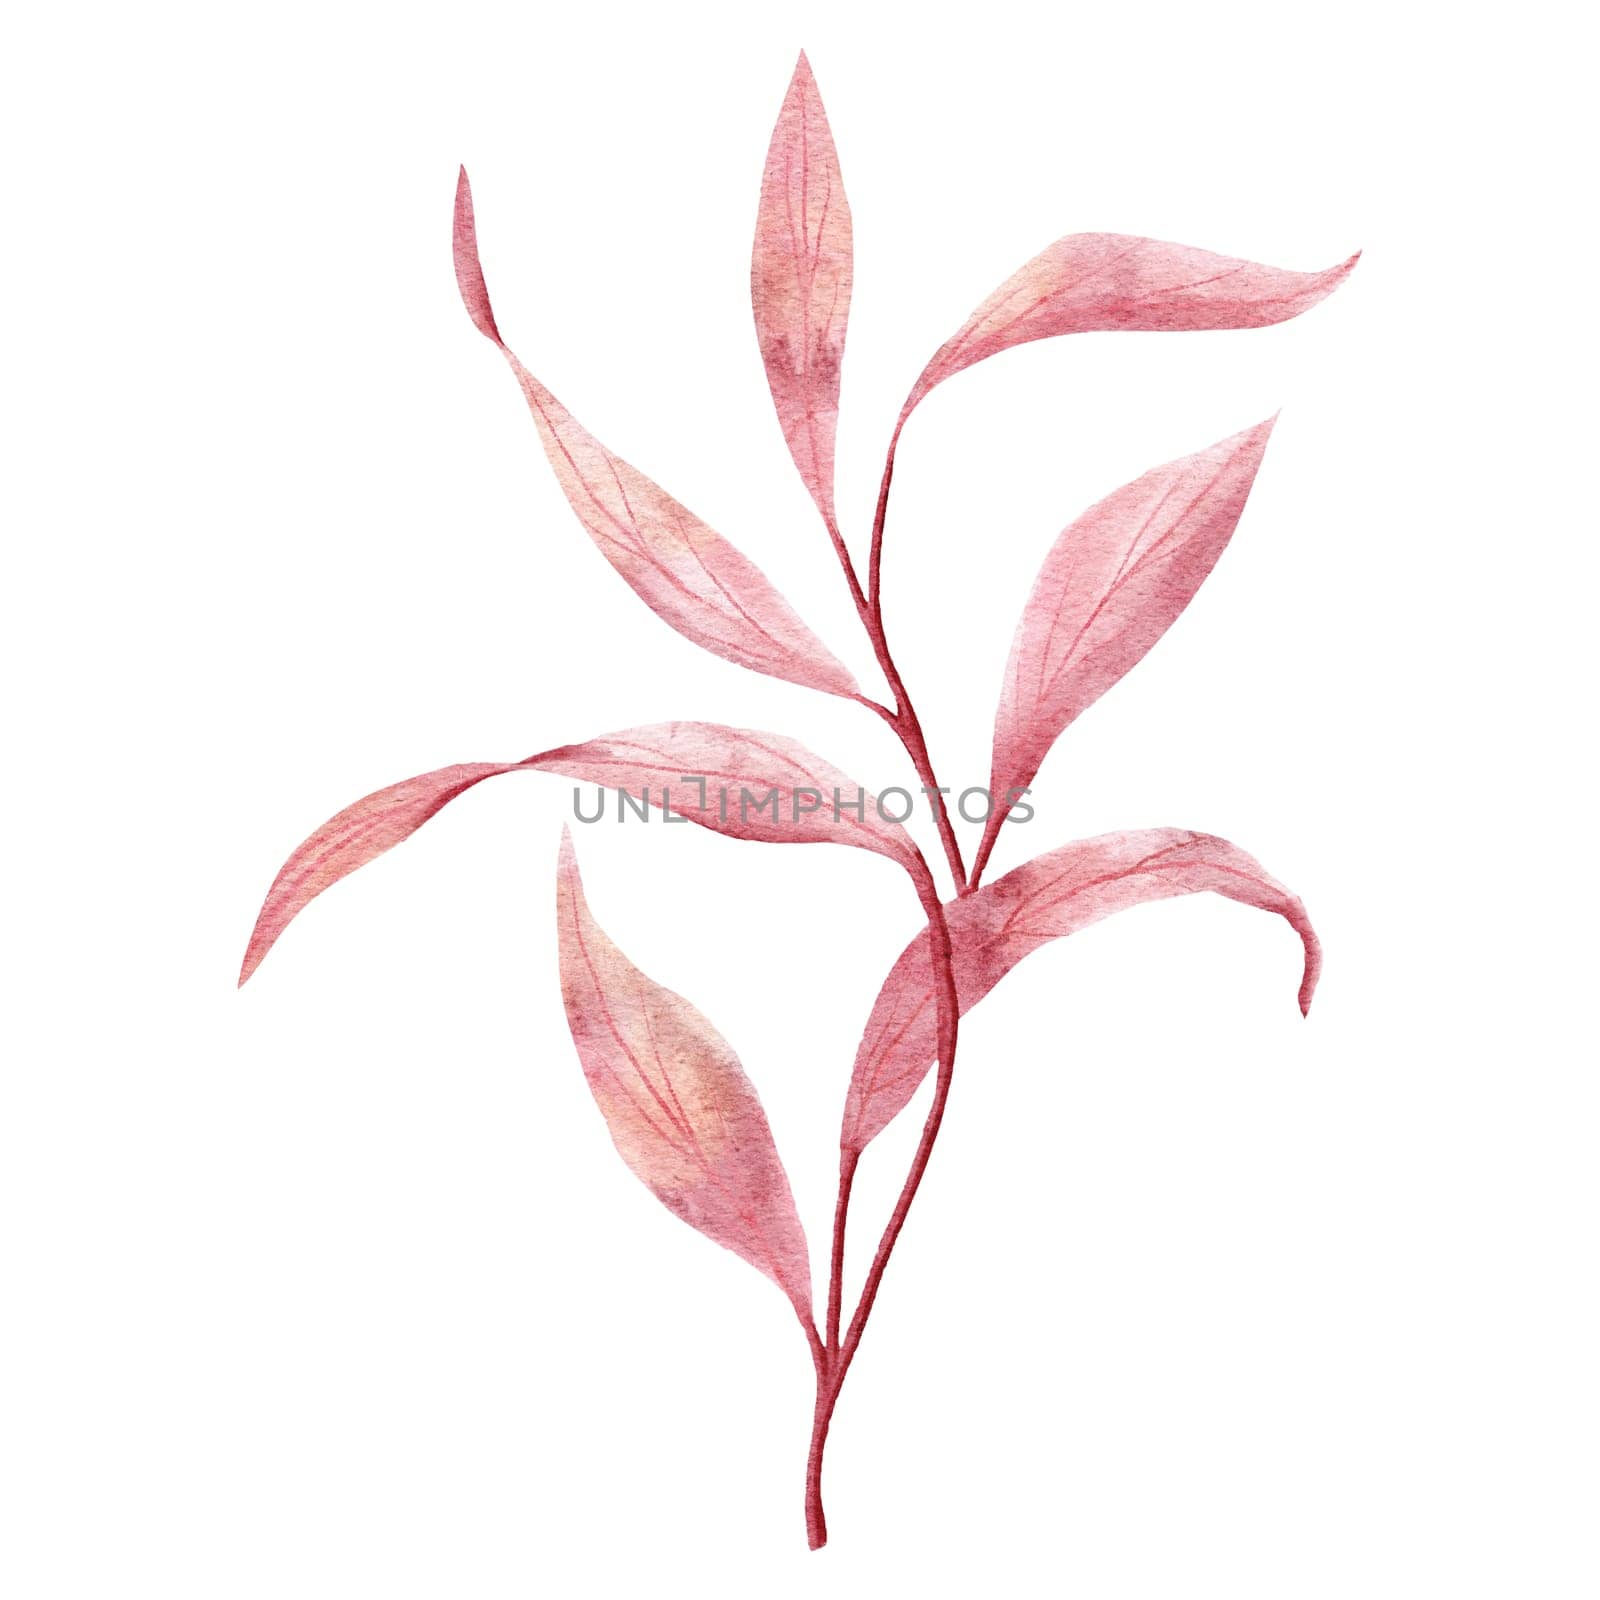 Hand drawn watercolor illustration of branch with peach fuzz orange pink leaves on white background. Lilac leaf plant colorful bright saturated print. Nature mystic elegant magic wood plant, botanical